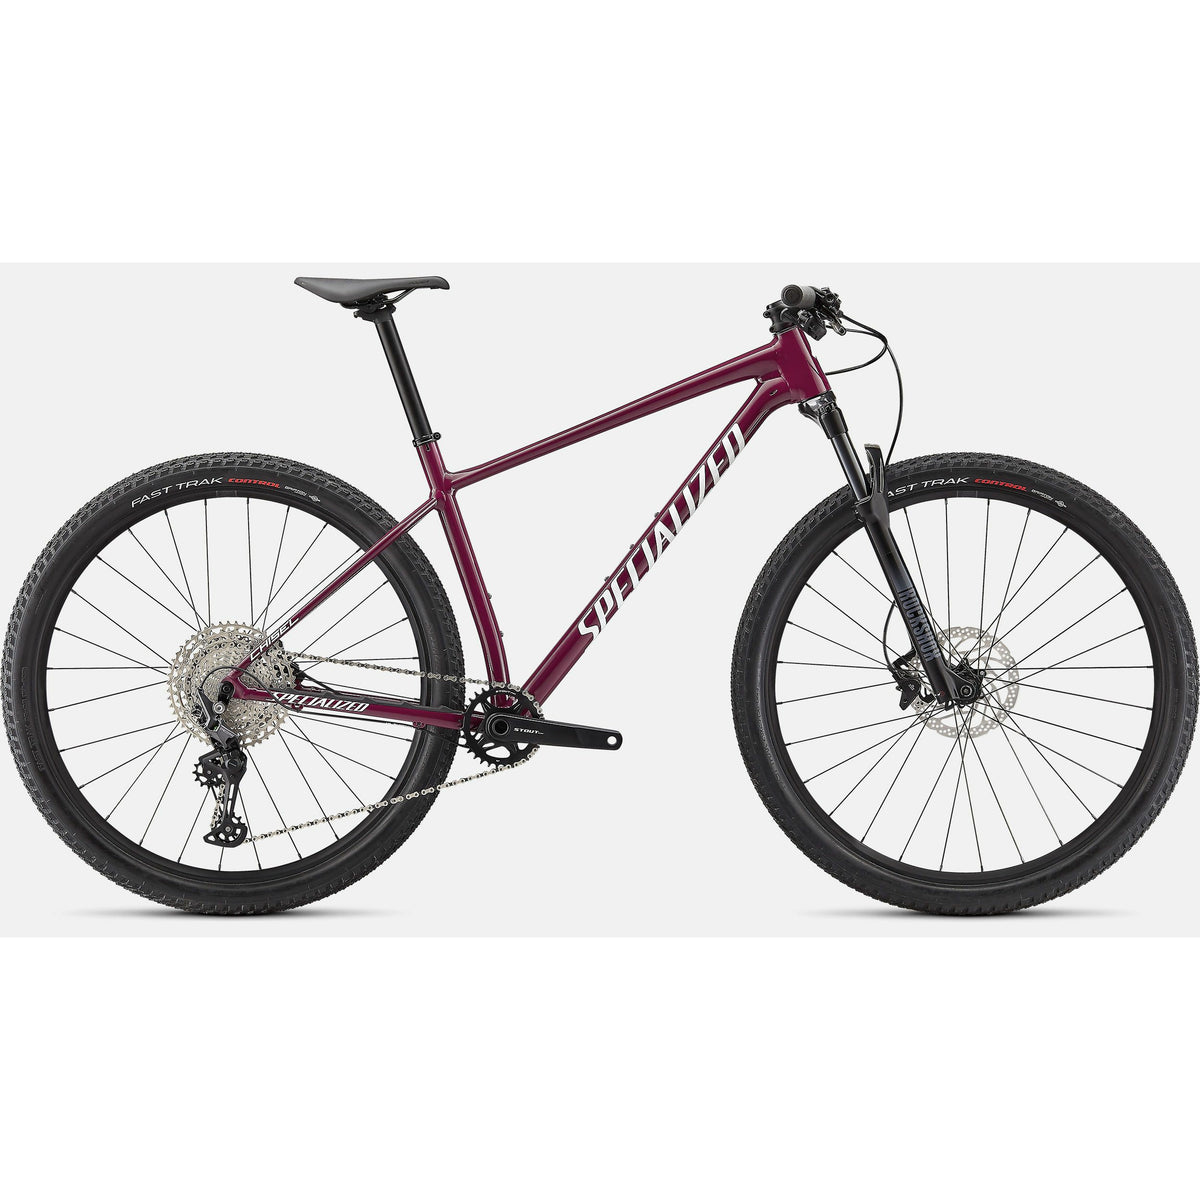 2021 Specialized Chisel Hardtail Disc Mountain Bike